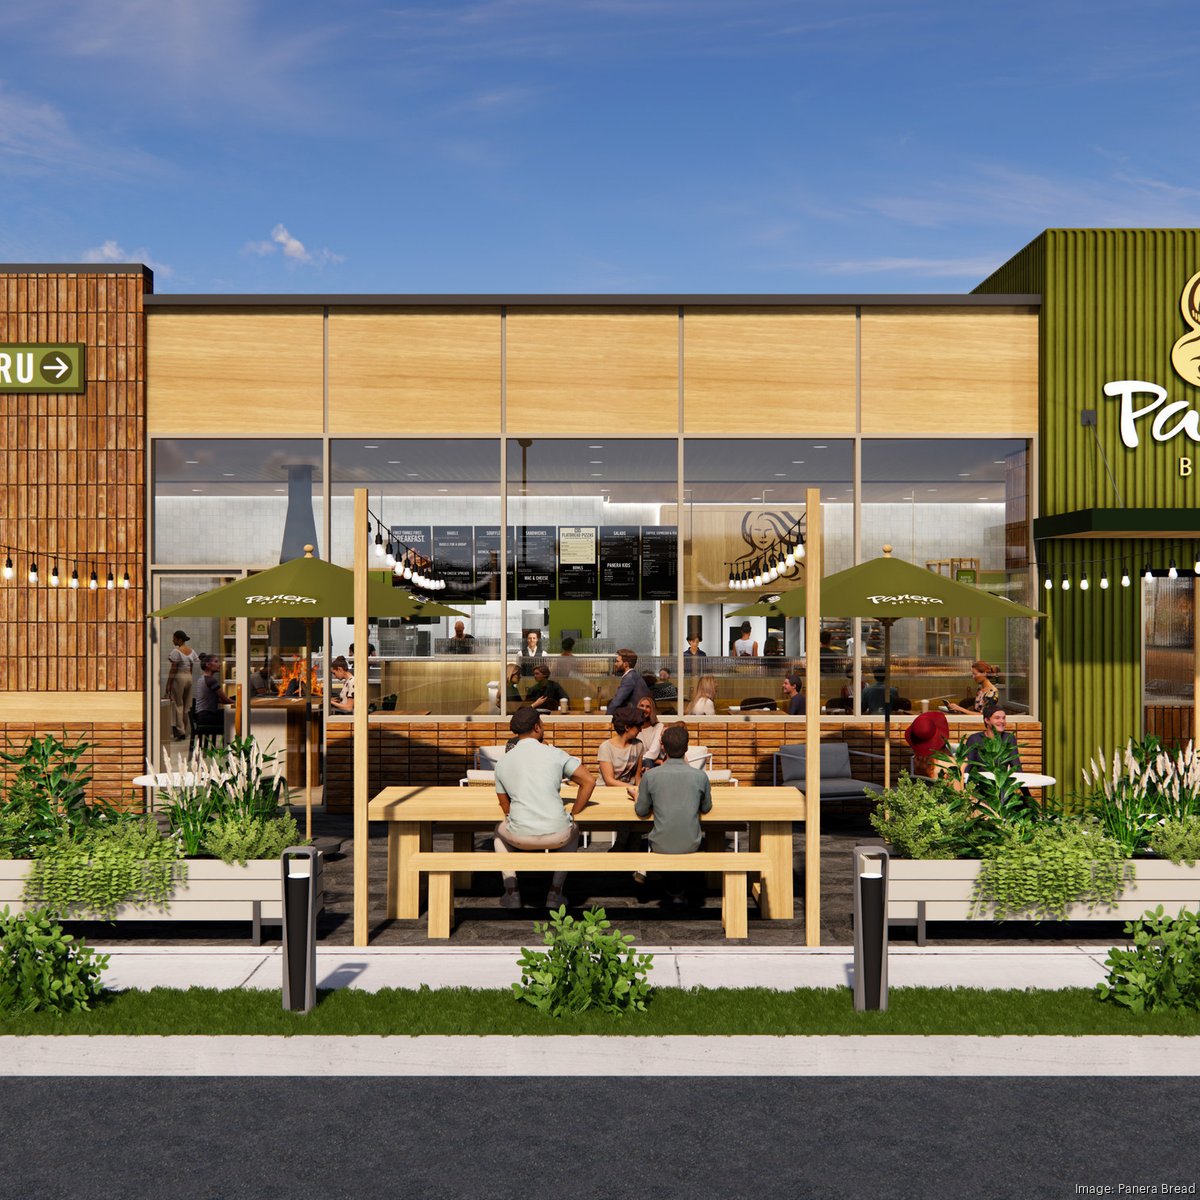 New Panera Bread coming to south Columbia - ABC17NEWS